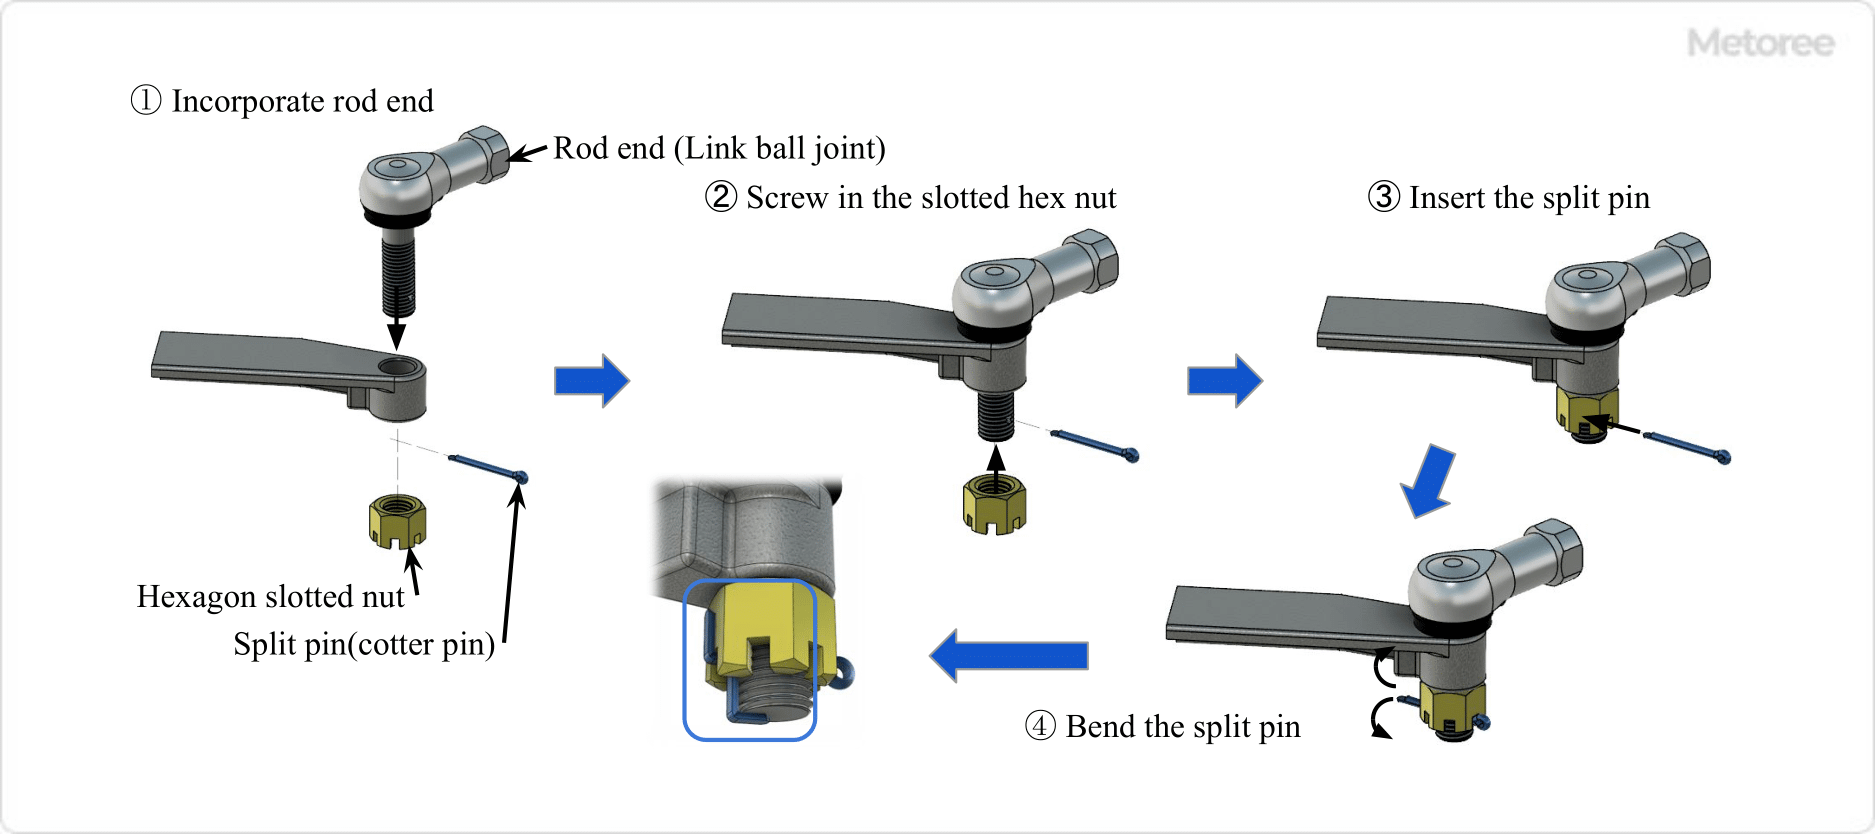 Figure 3. Installation of hexagon slotted nut and split pin